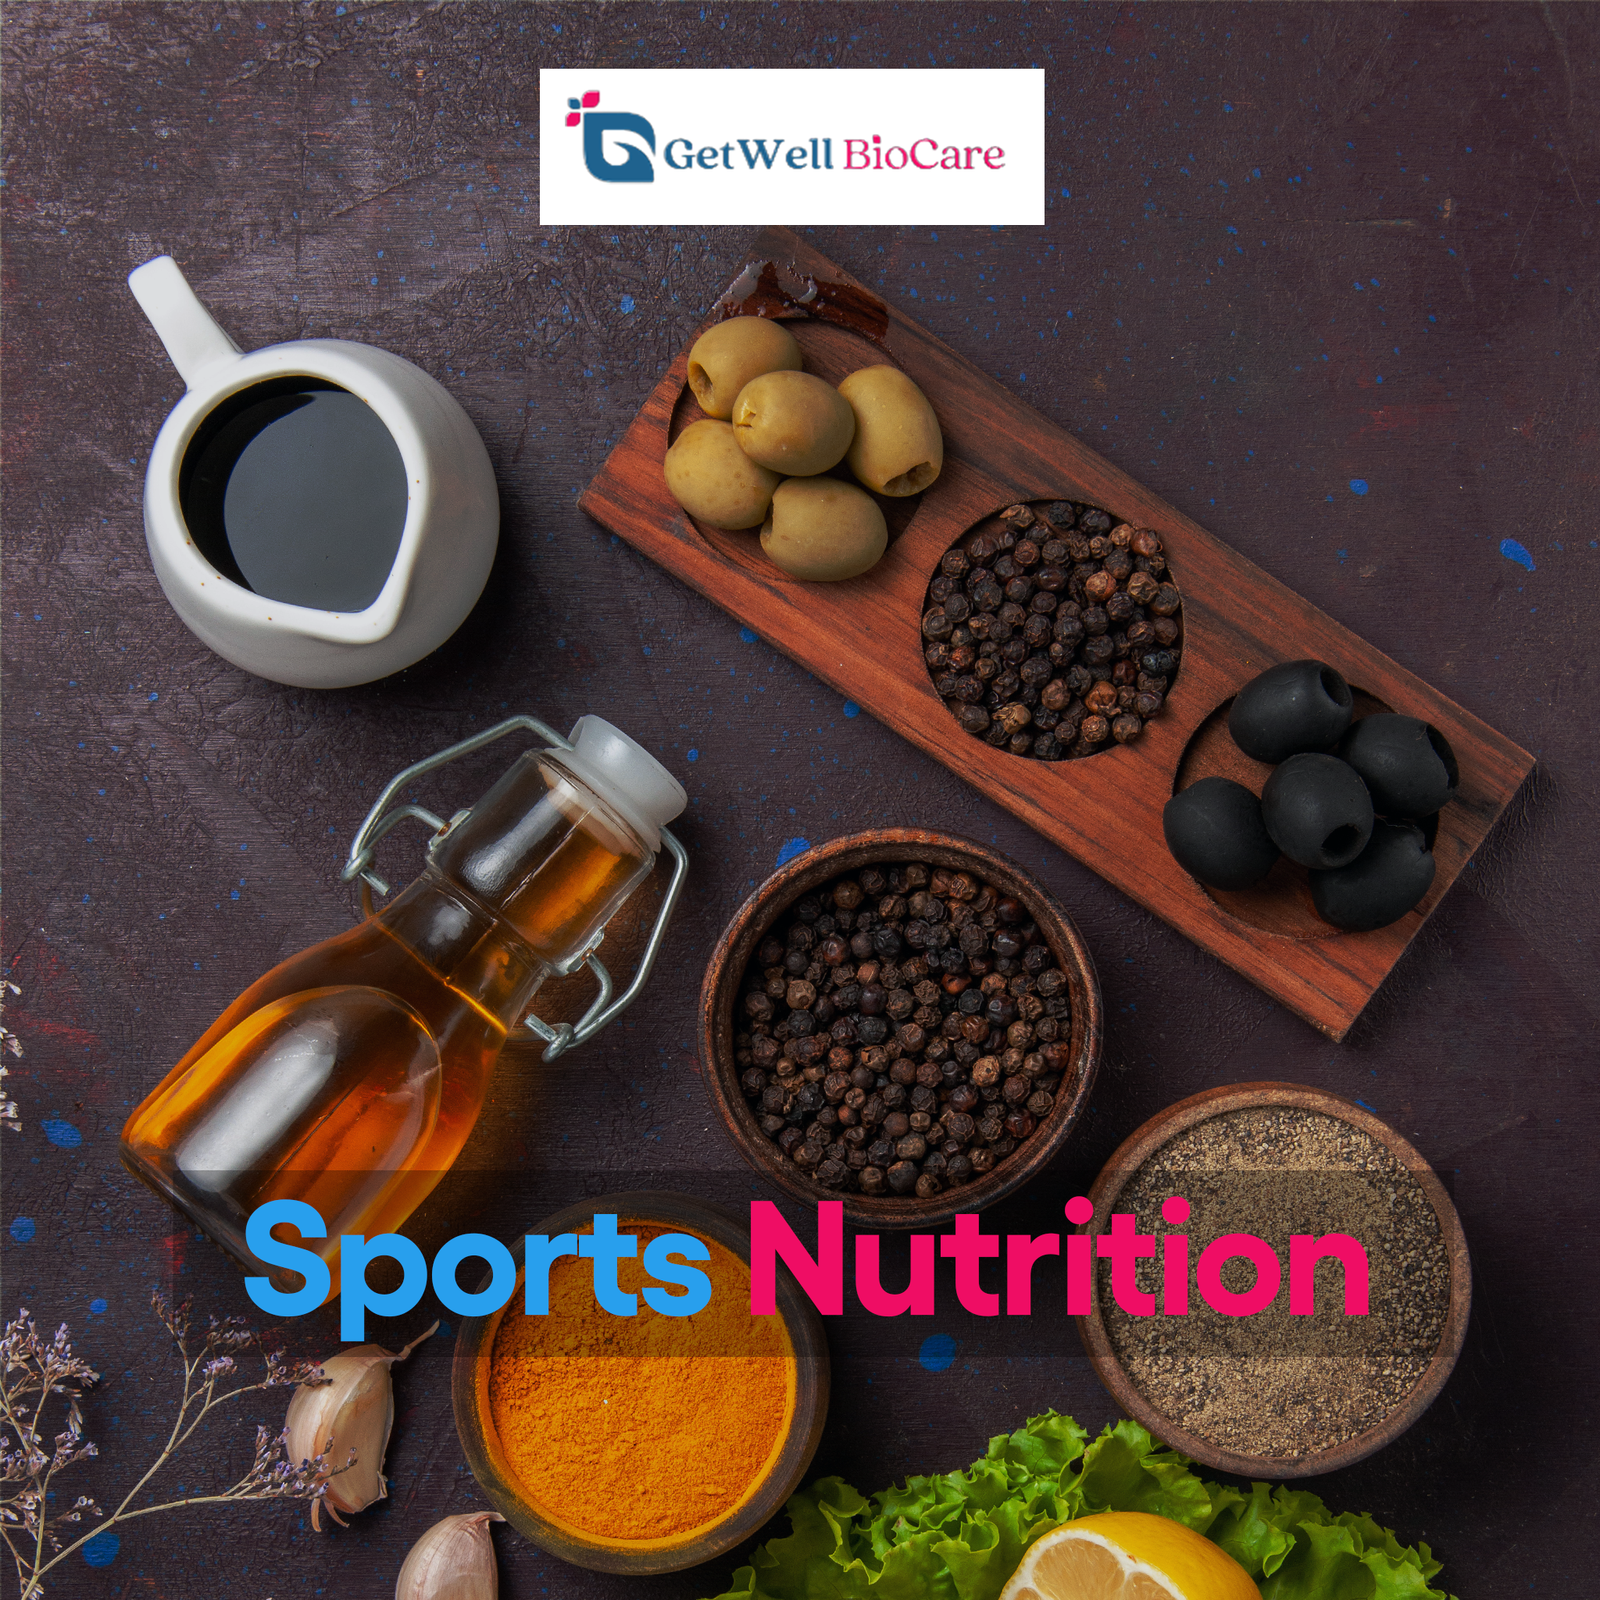 Sports Nutrition and Supplements Manufacturers